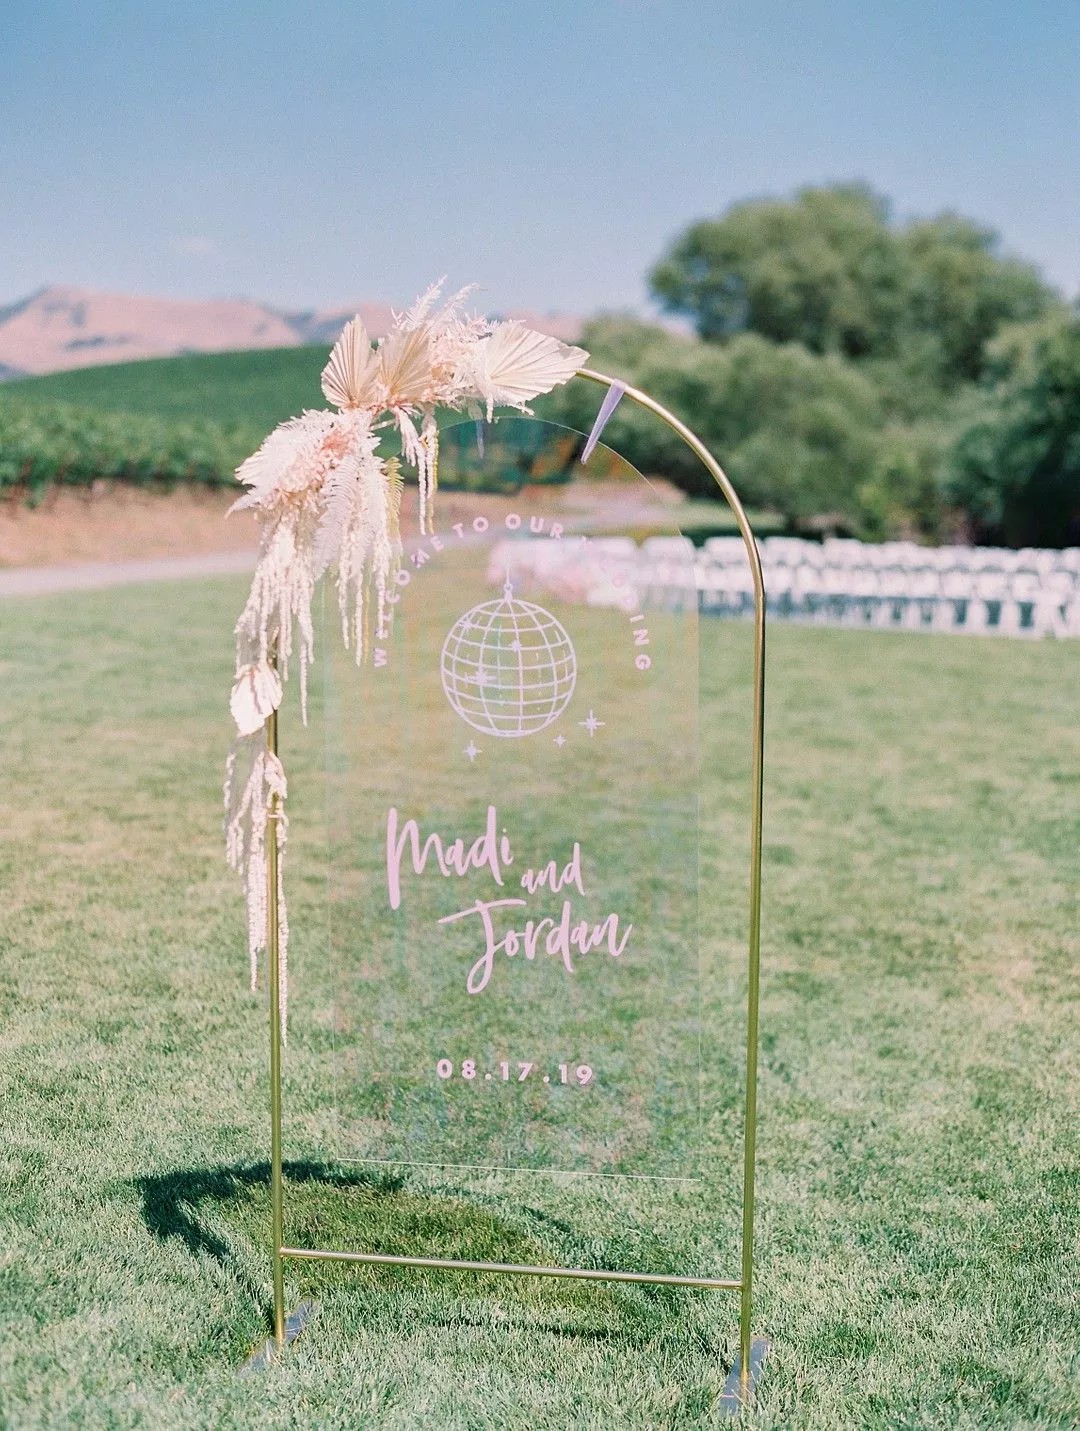 46 Amazing Wedding Sign Ideas To Décor Your Must-Know Wedding Instructions